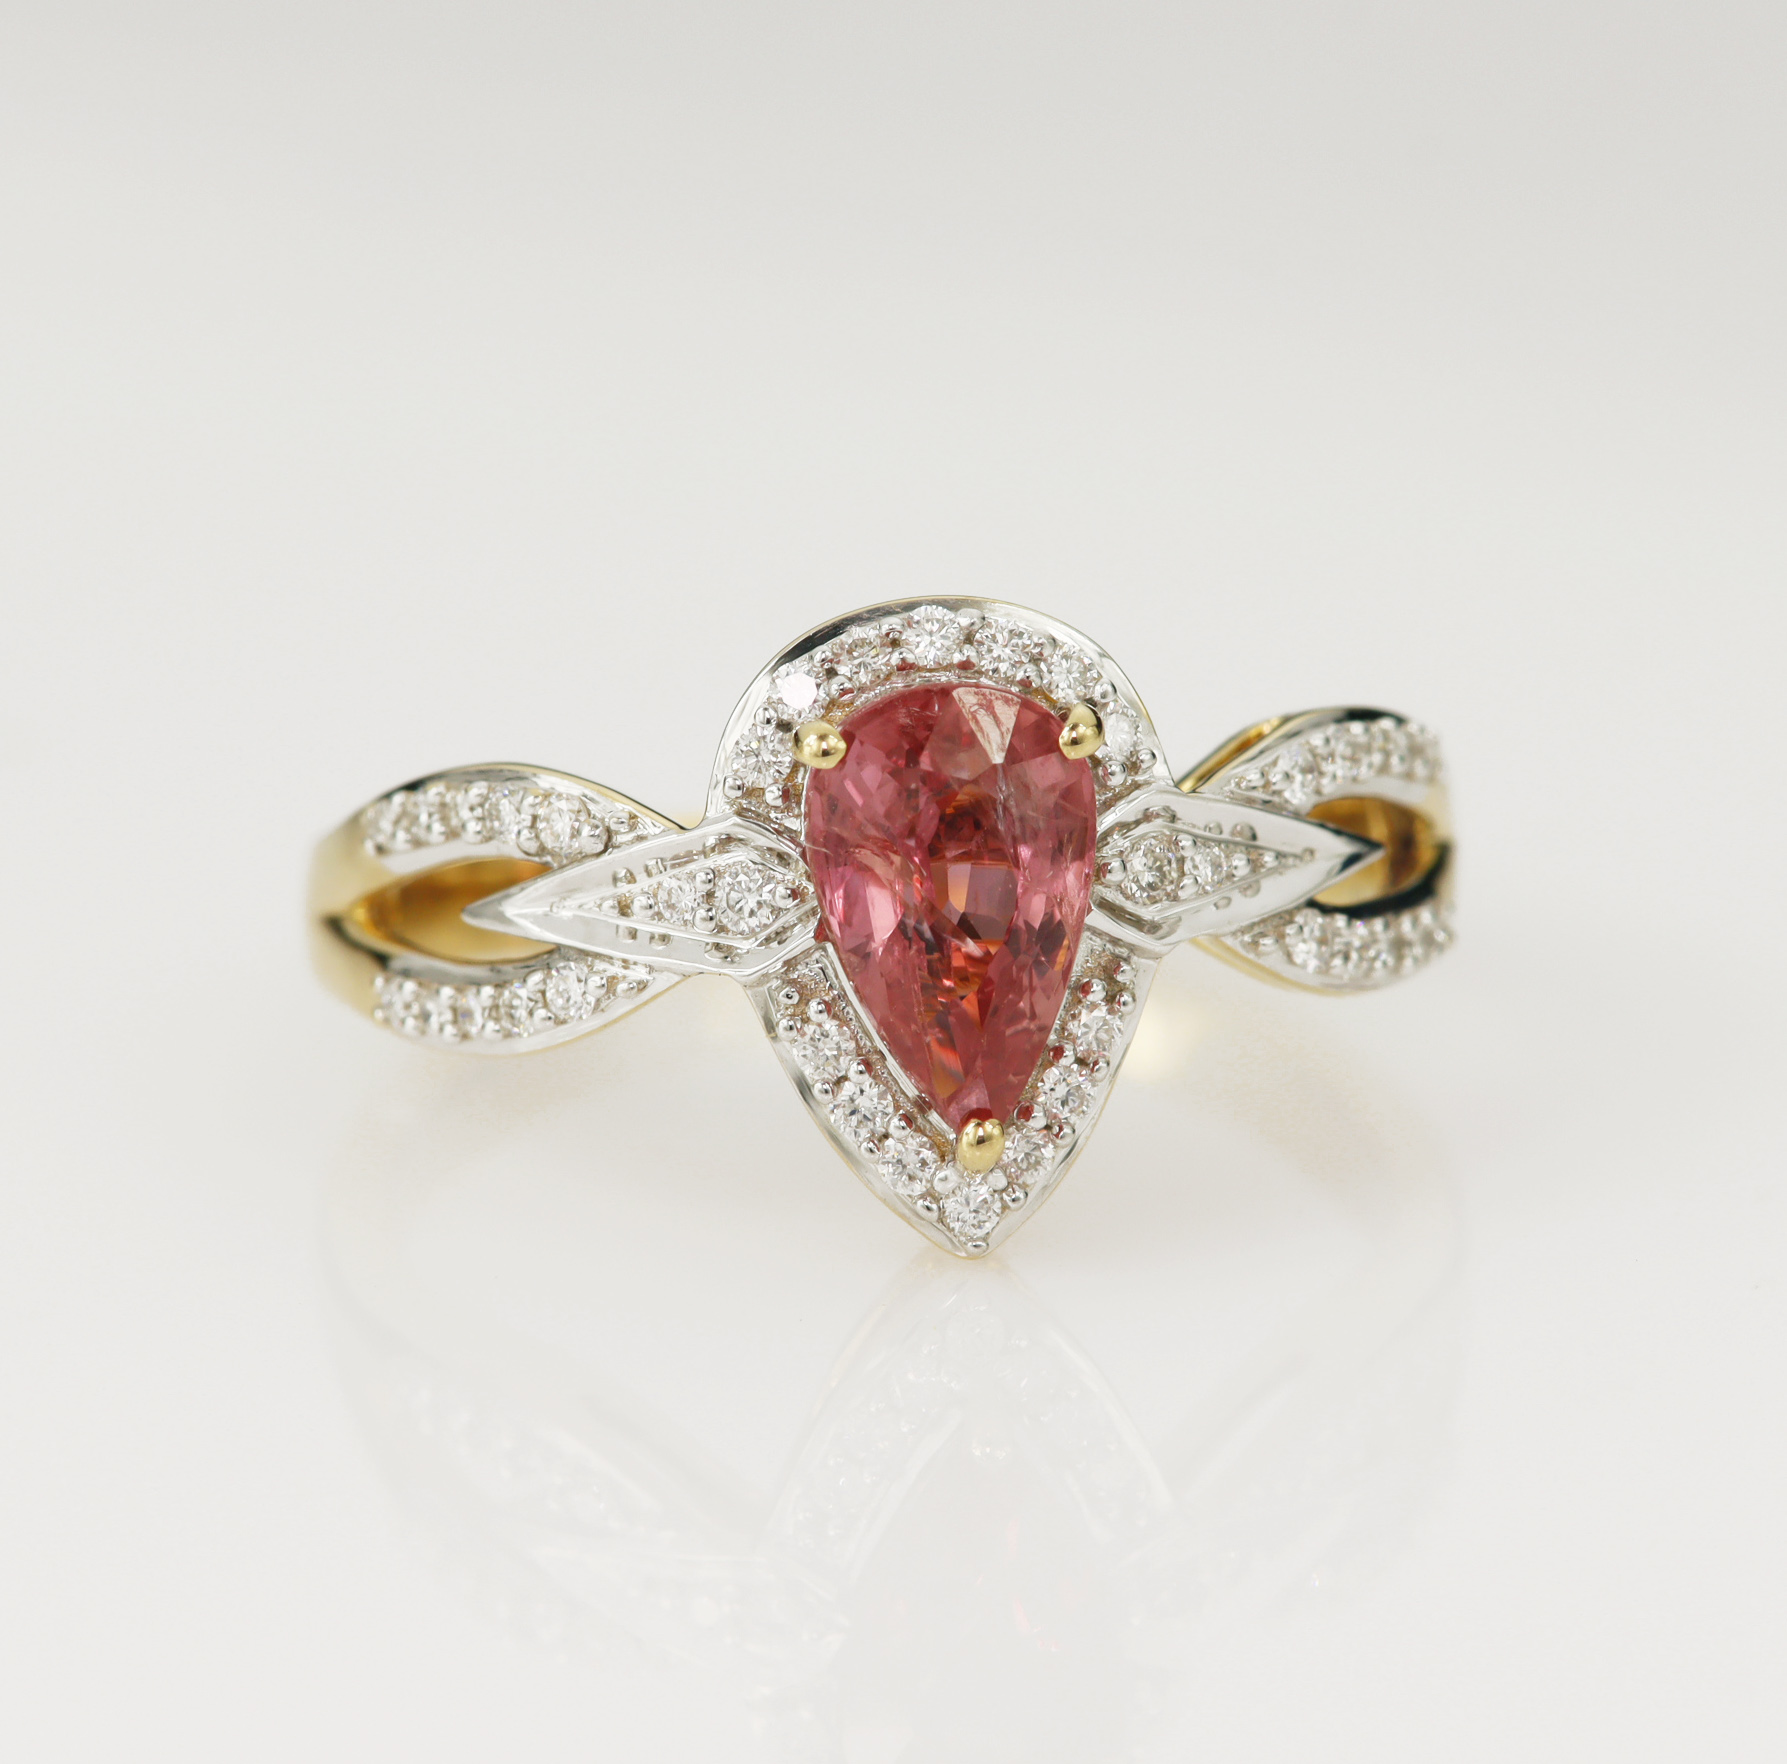 18ct yellow gold padparadscha sapphire and diamond dress ring, one pear cut padparadscha measuring